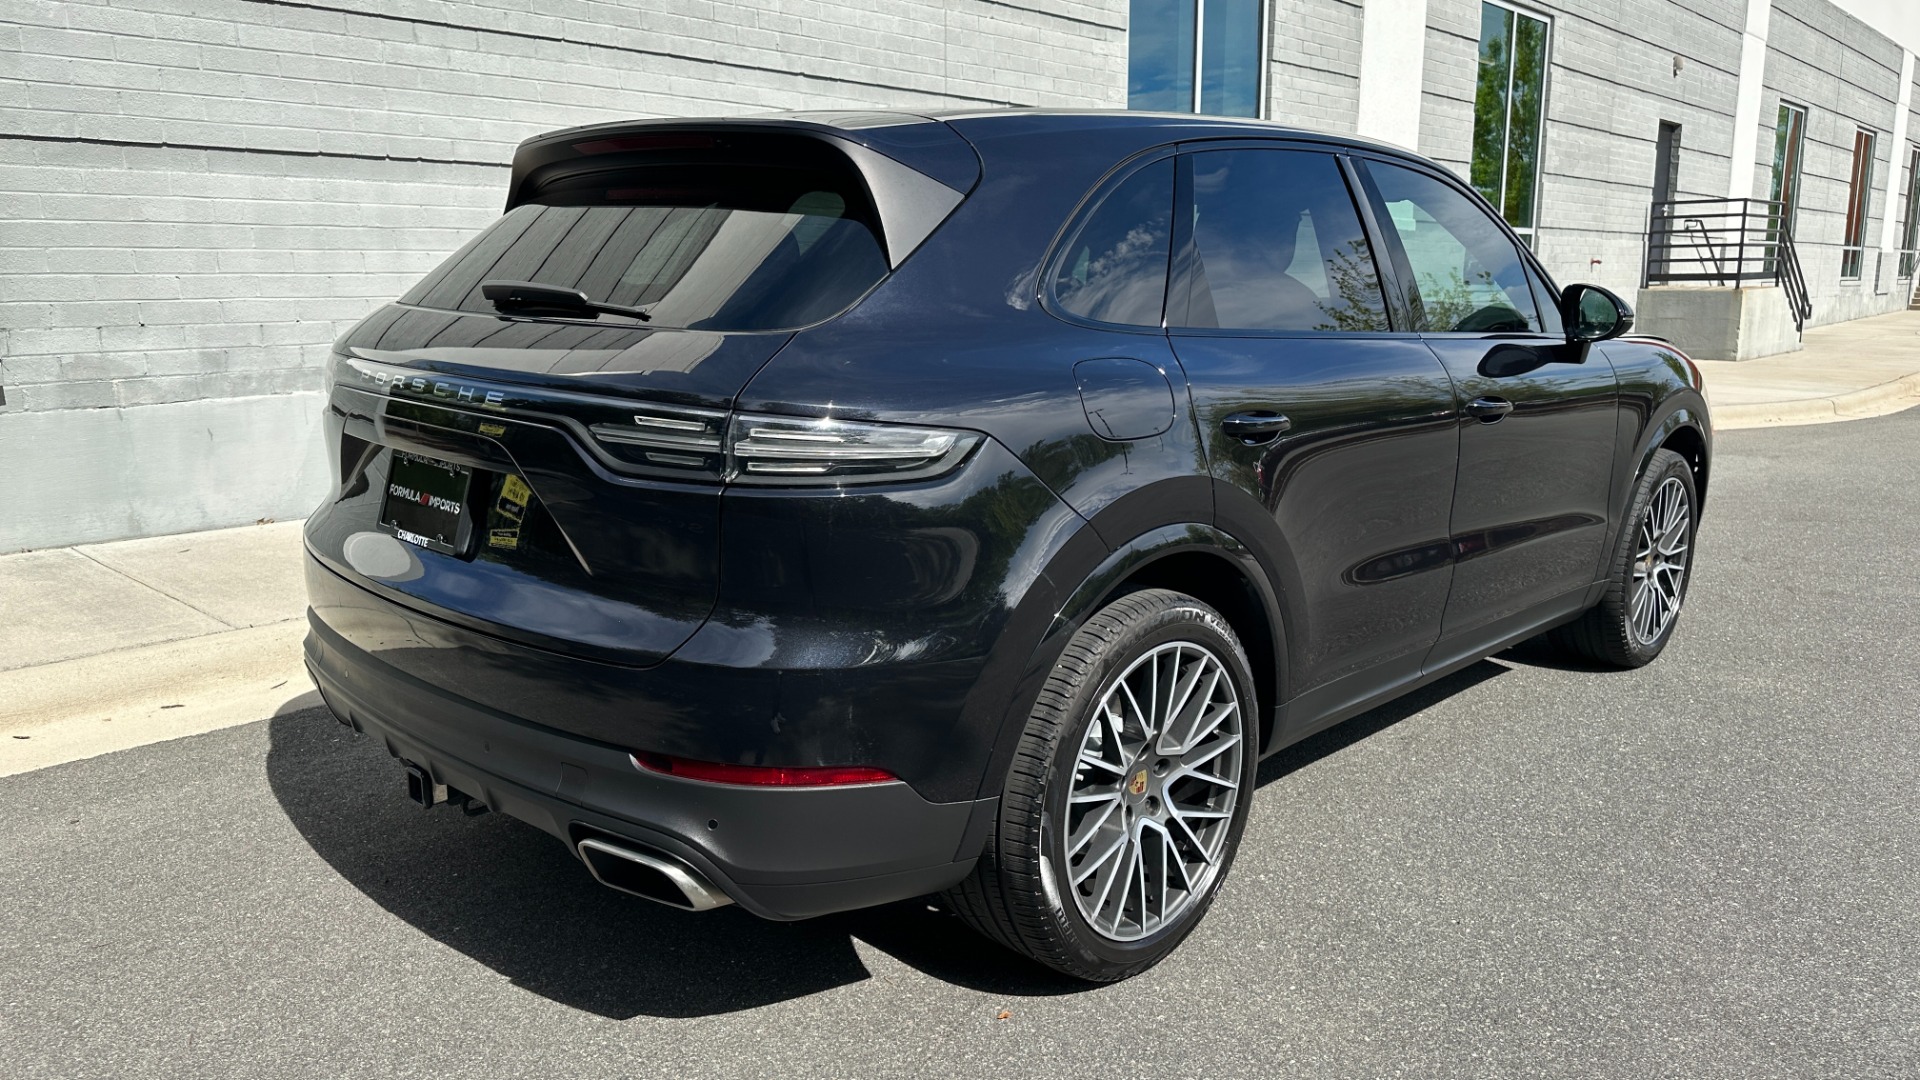 Used 2019 Porsche Cayenne AWD / PREMIUM / TOWING PKG / BOSE AUDIO / GLOSS BLACK TRIM for sale $54,995 at Formula Imports in Charlotte NC 28227 4